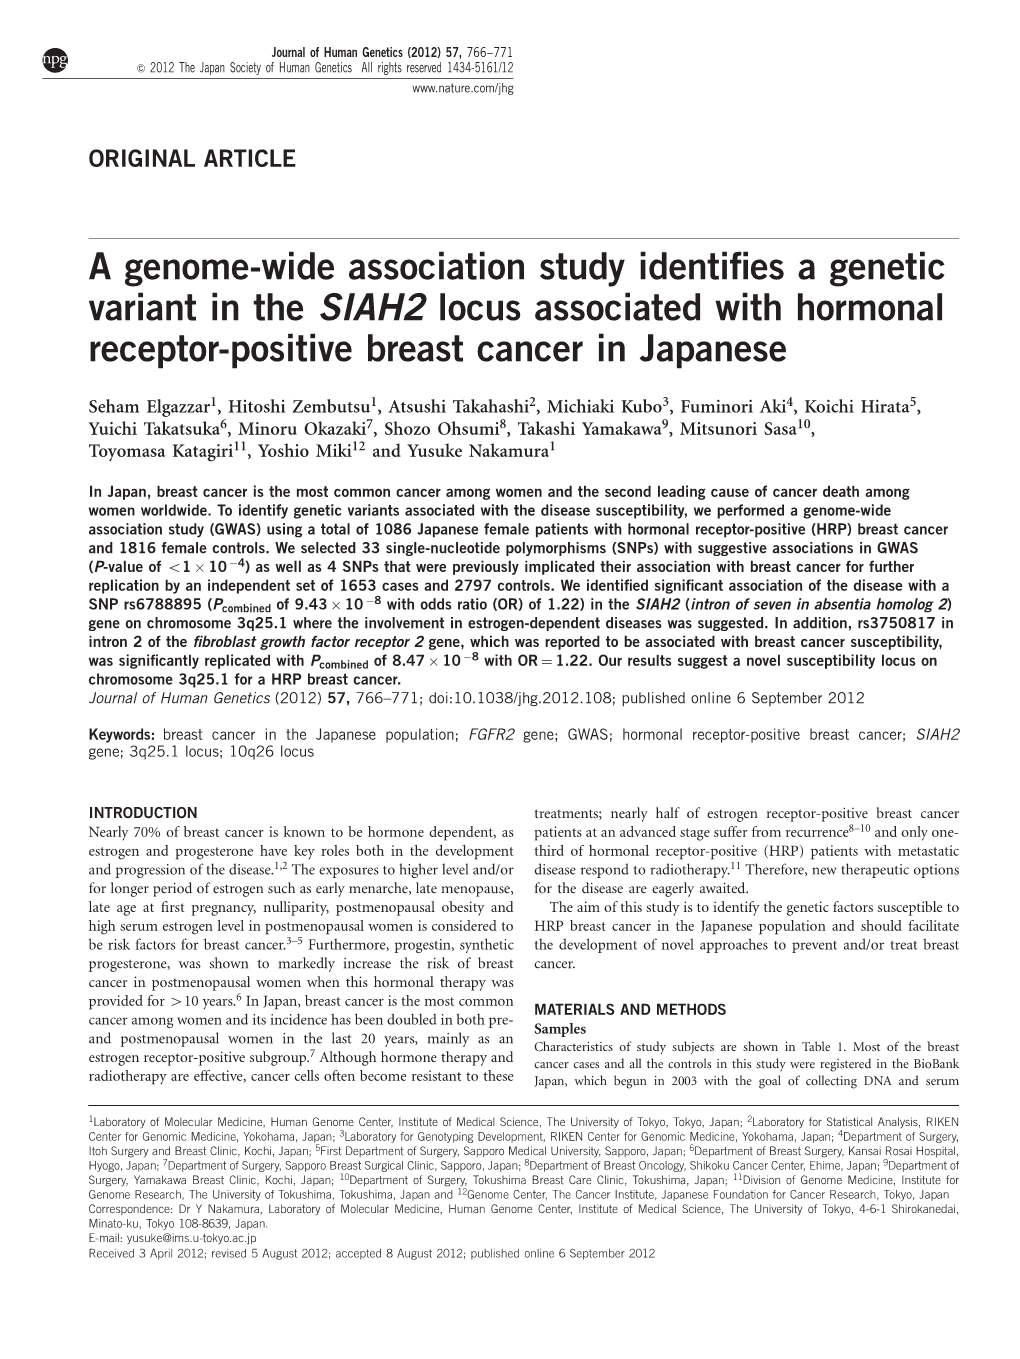 A Genome-Wide Association Study Identifies a Genetic Variant in The